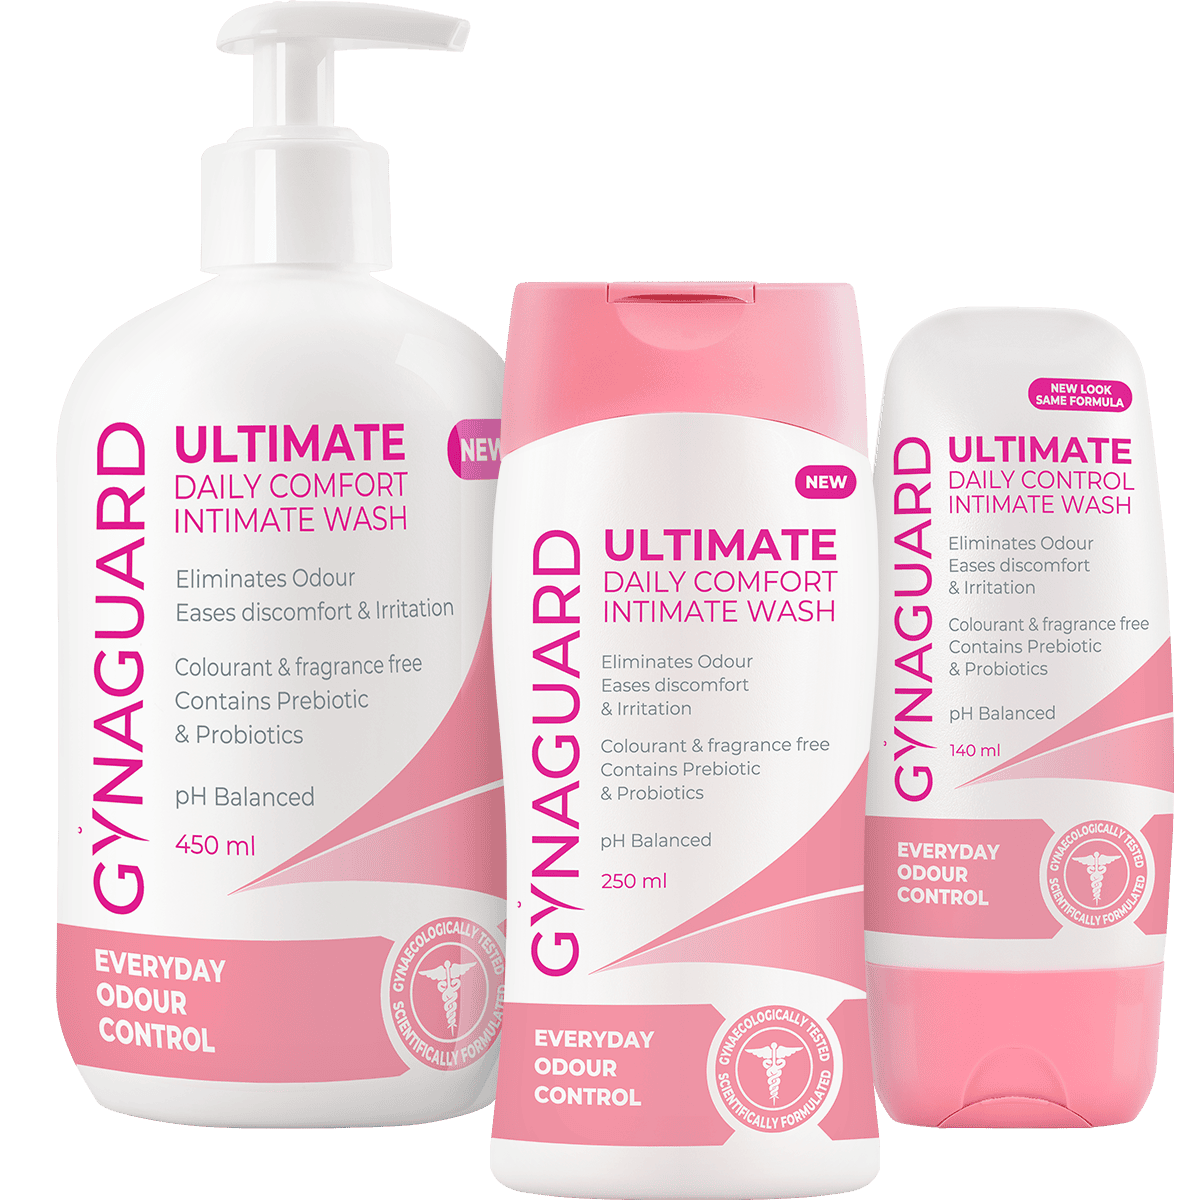 ULTIMATE DAILY CONTROL INTIMATE WASH